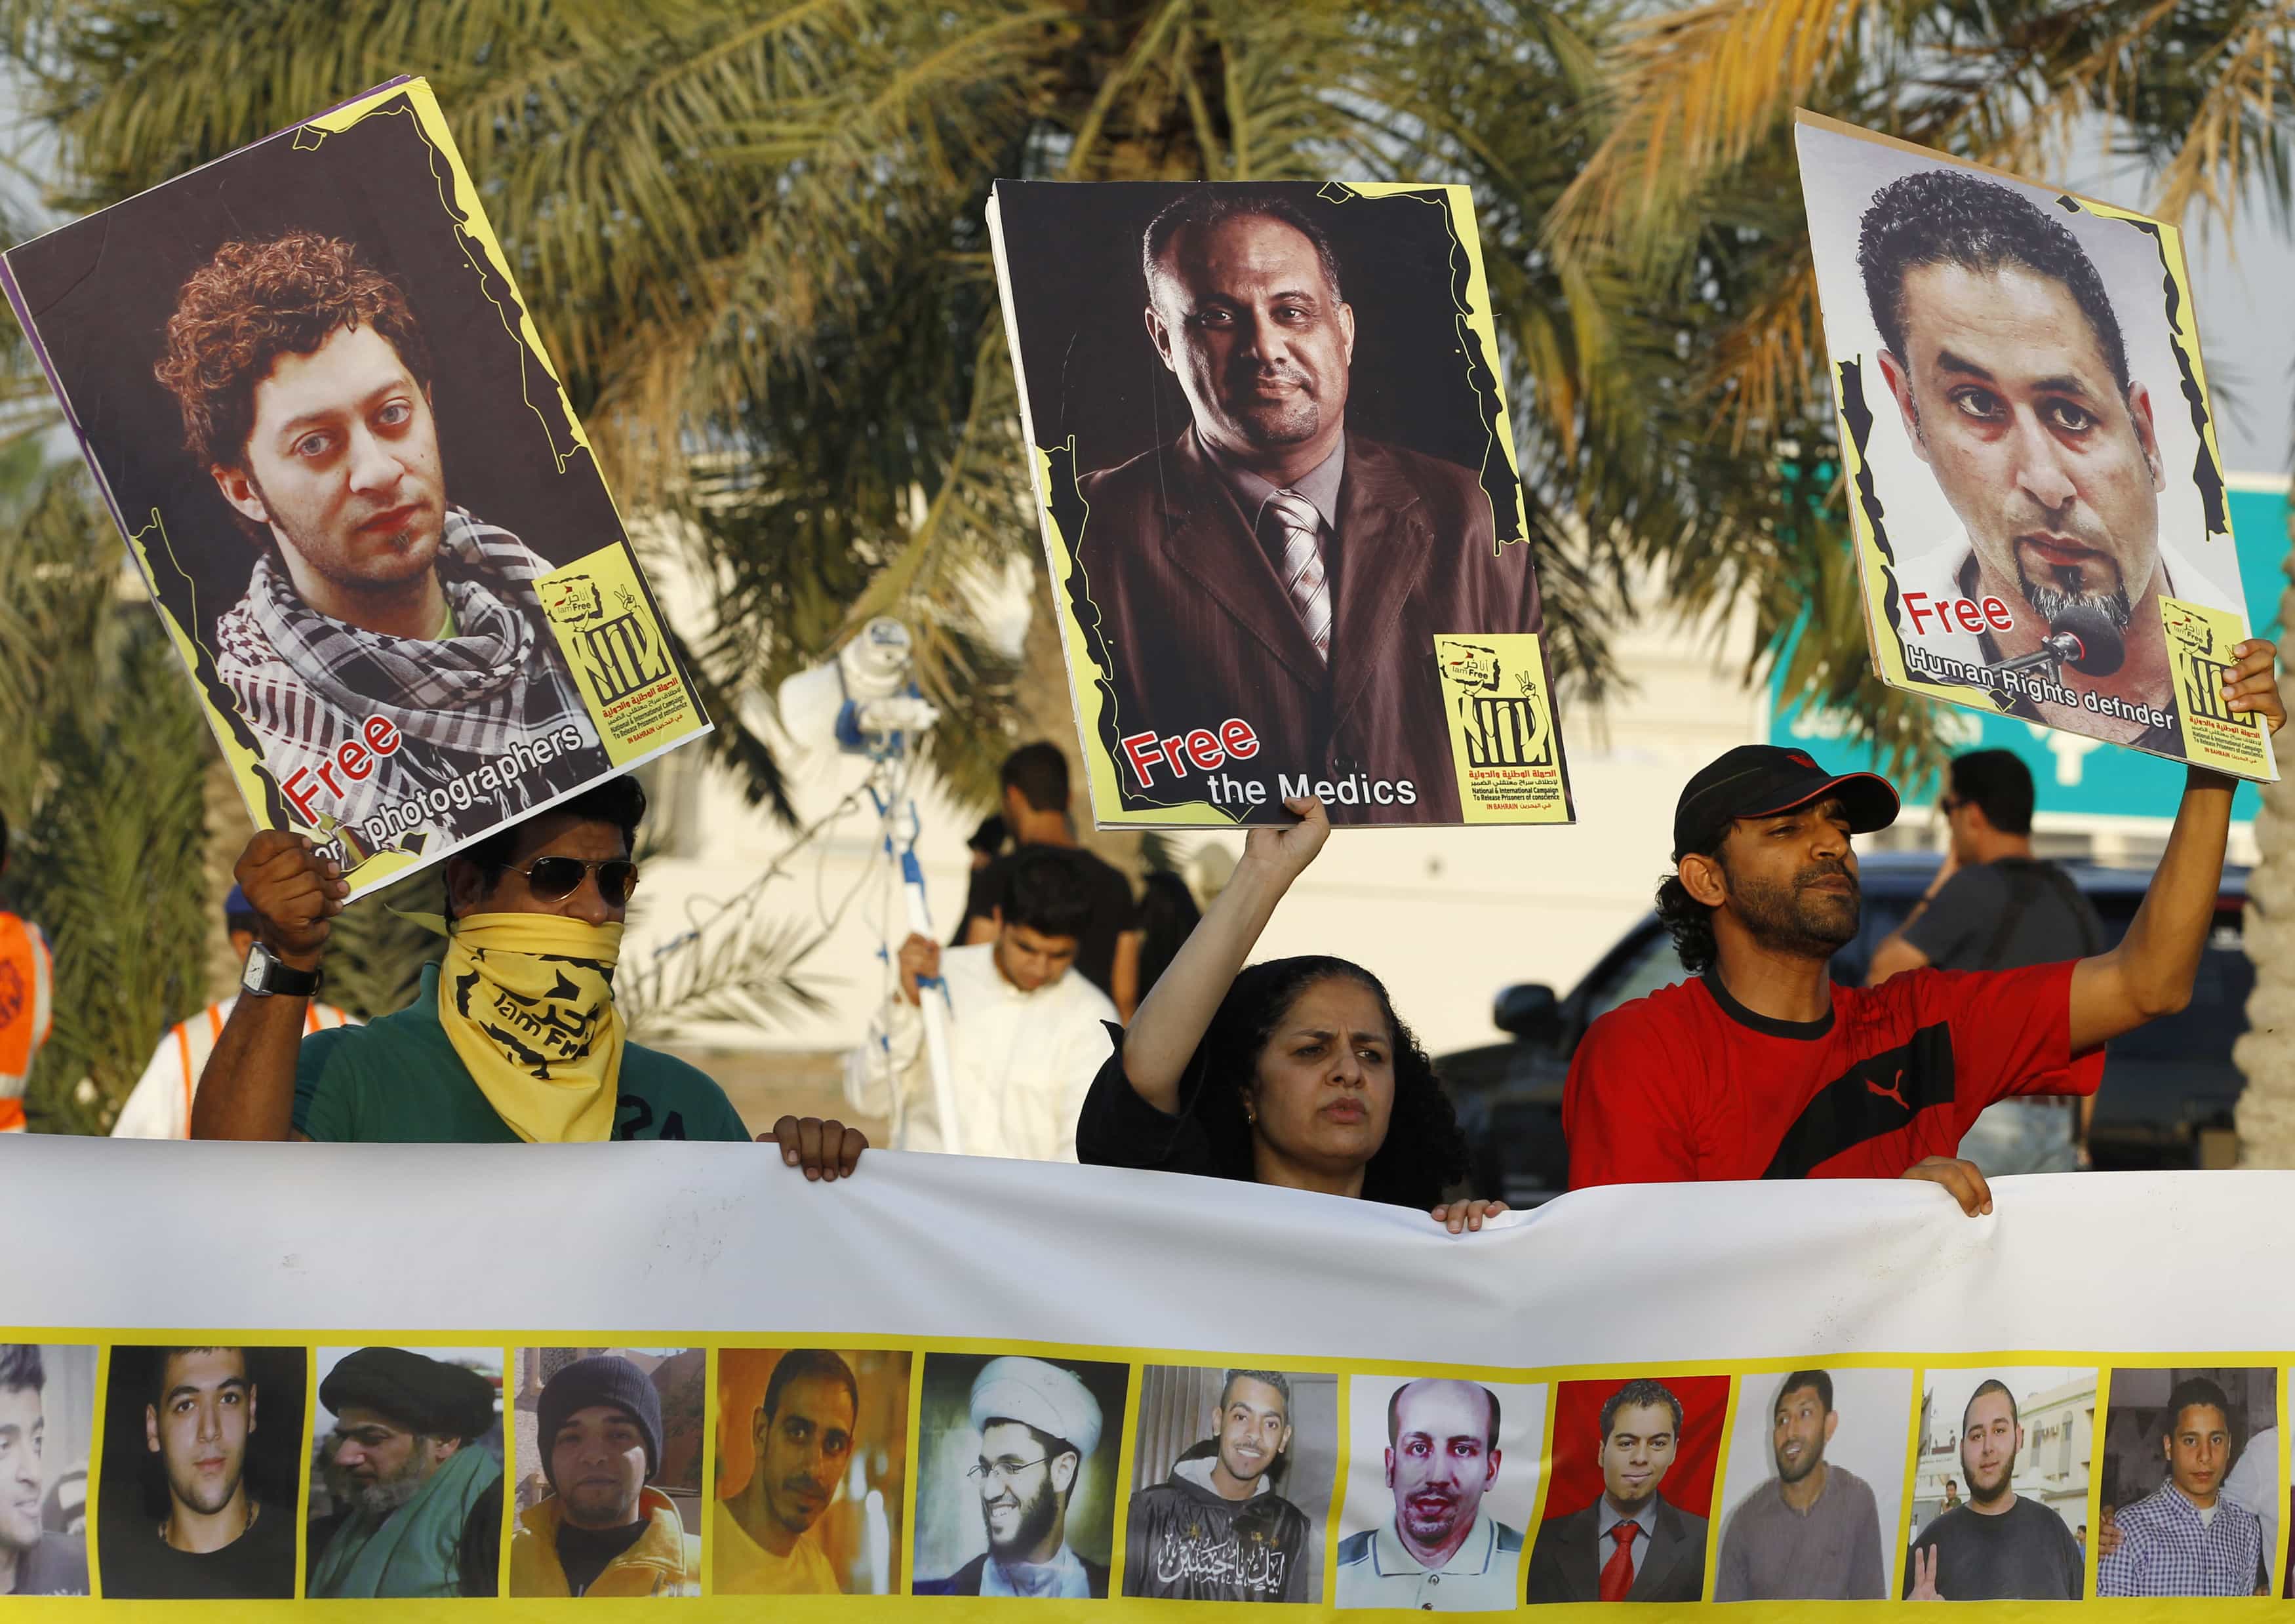 Protesters hold up pictures of journalists, doctors, and activists as they take part in a solidarity march asking for their release in Manama on 9 May 2014, REUTERS/Hamad I Mohammed